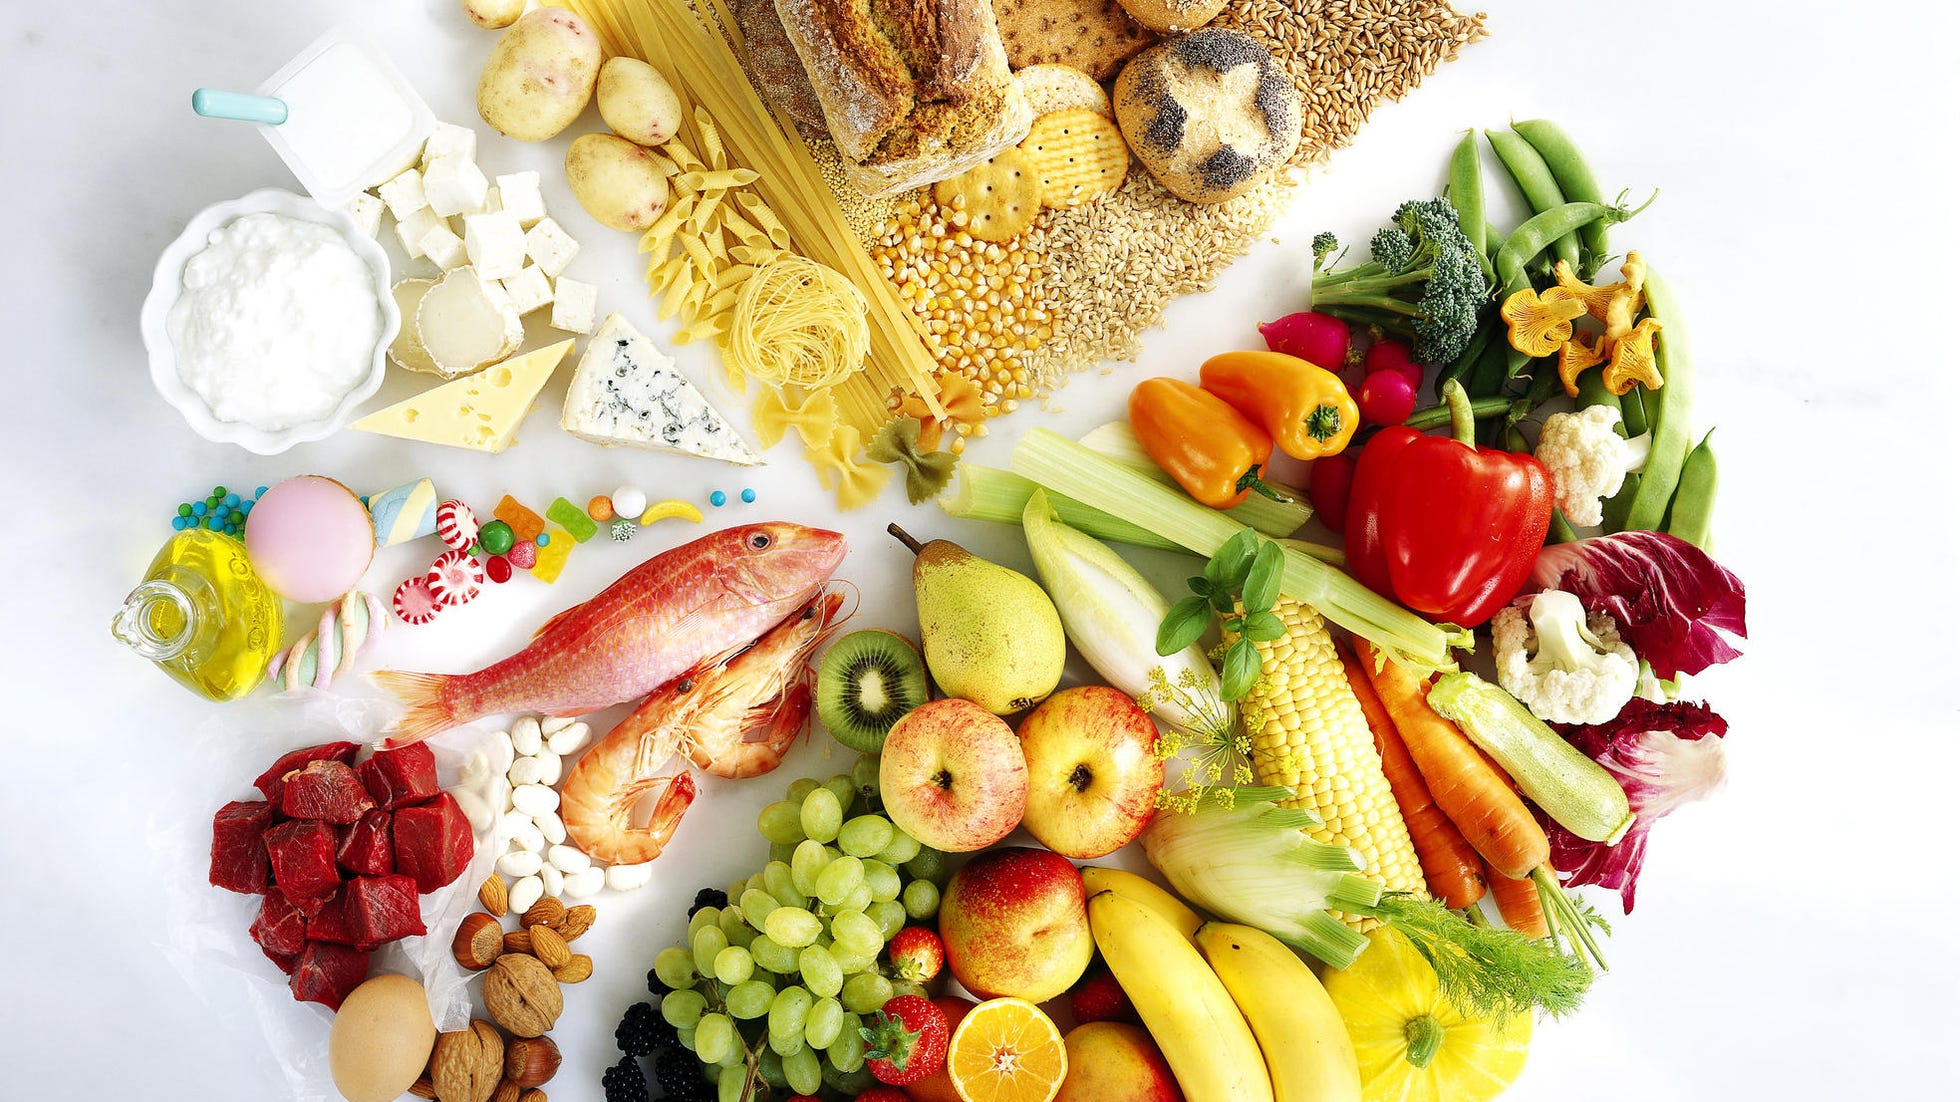 Understanding Macros The Ultimate Guide To Counting And Tracking Macronutrients Cnet